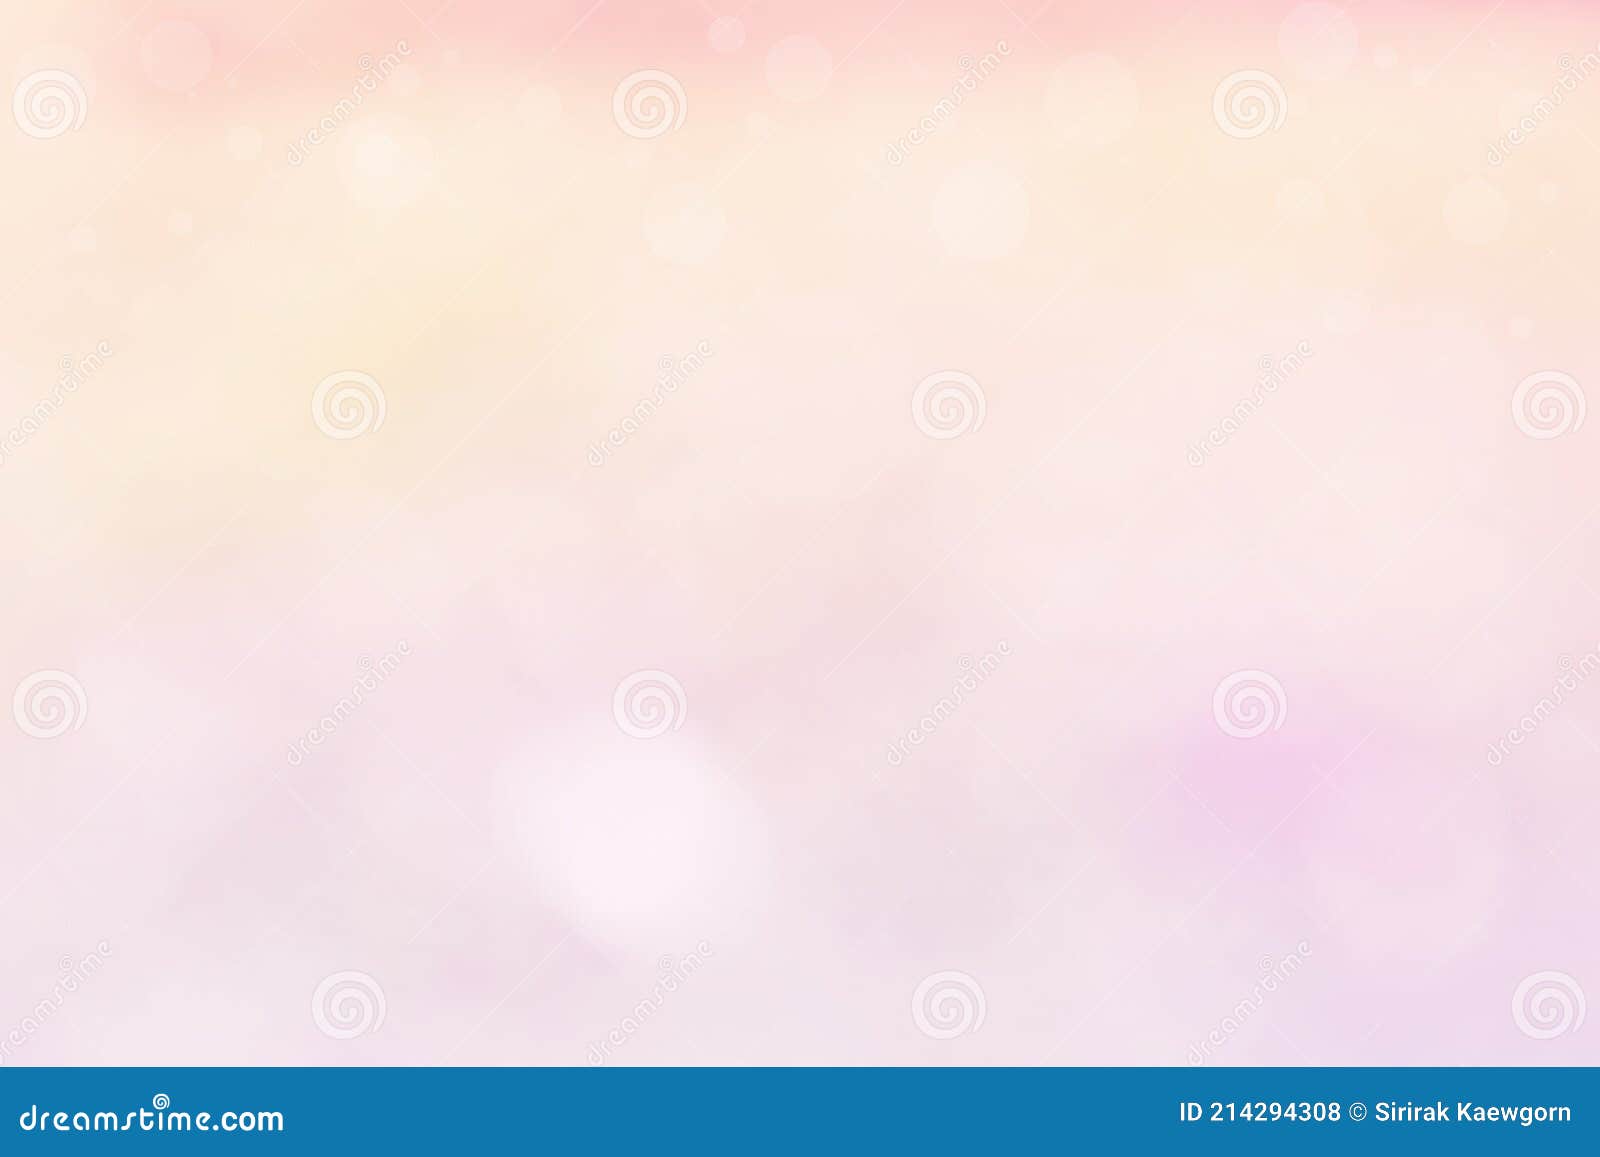 Abstract Pastel Color Gaussian Blurred Background Stock Photo - Image of  blank, bokeh: 214294308